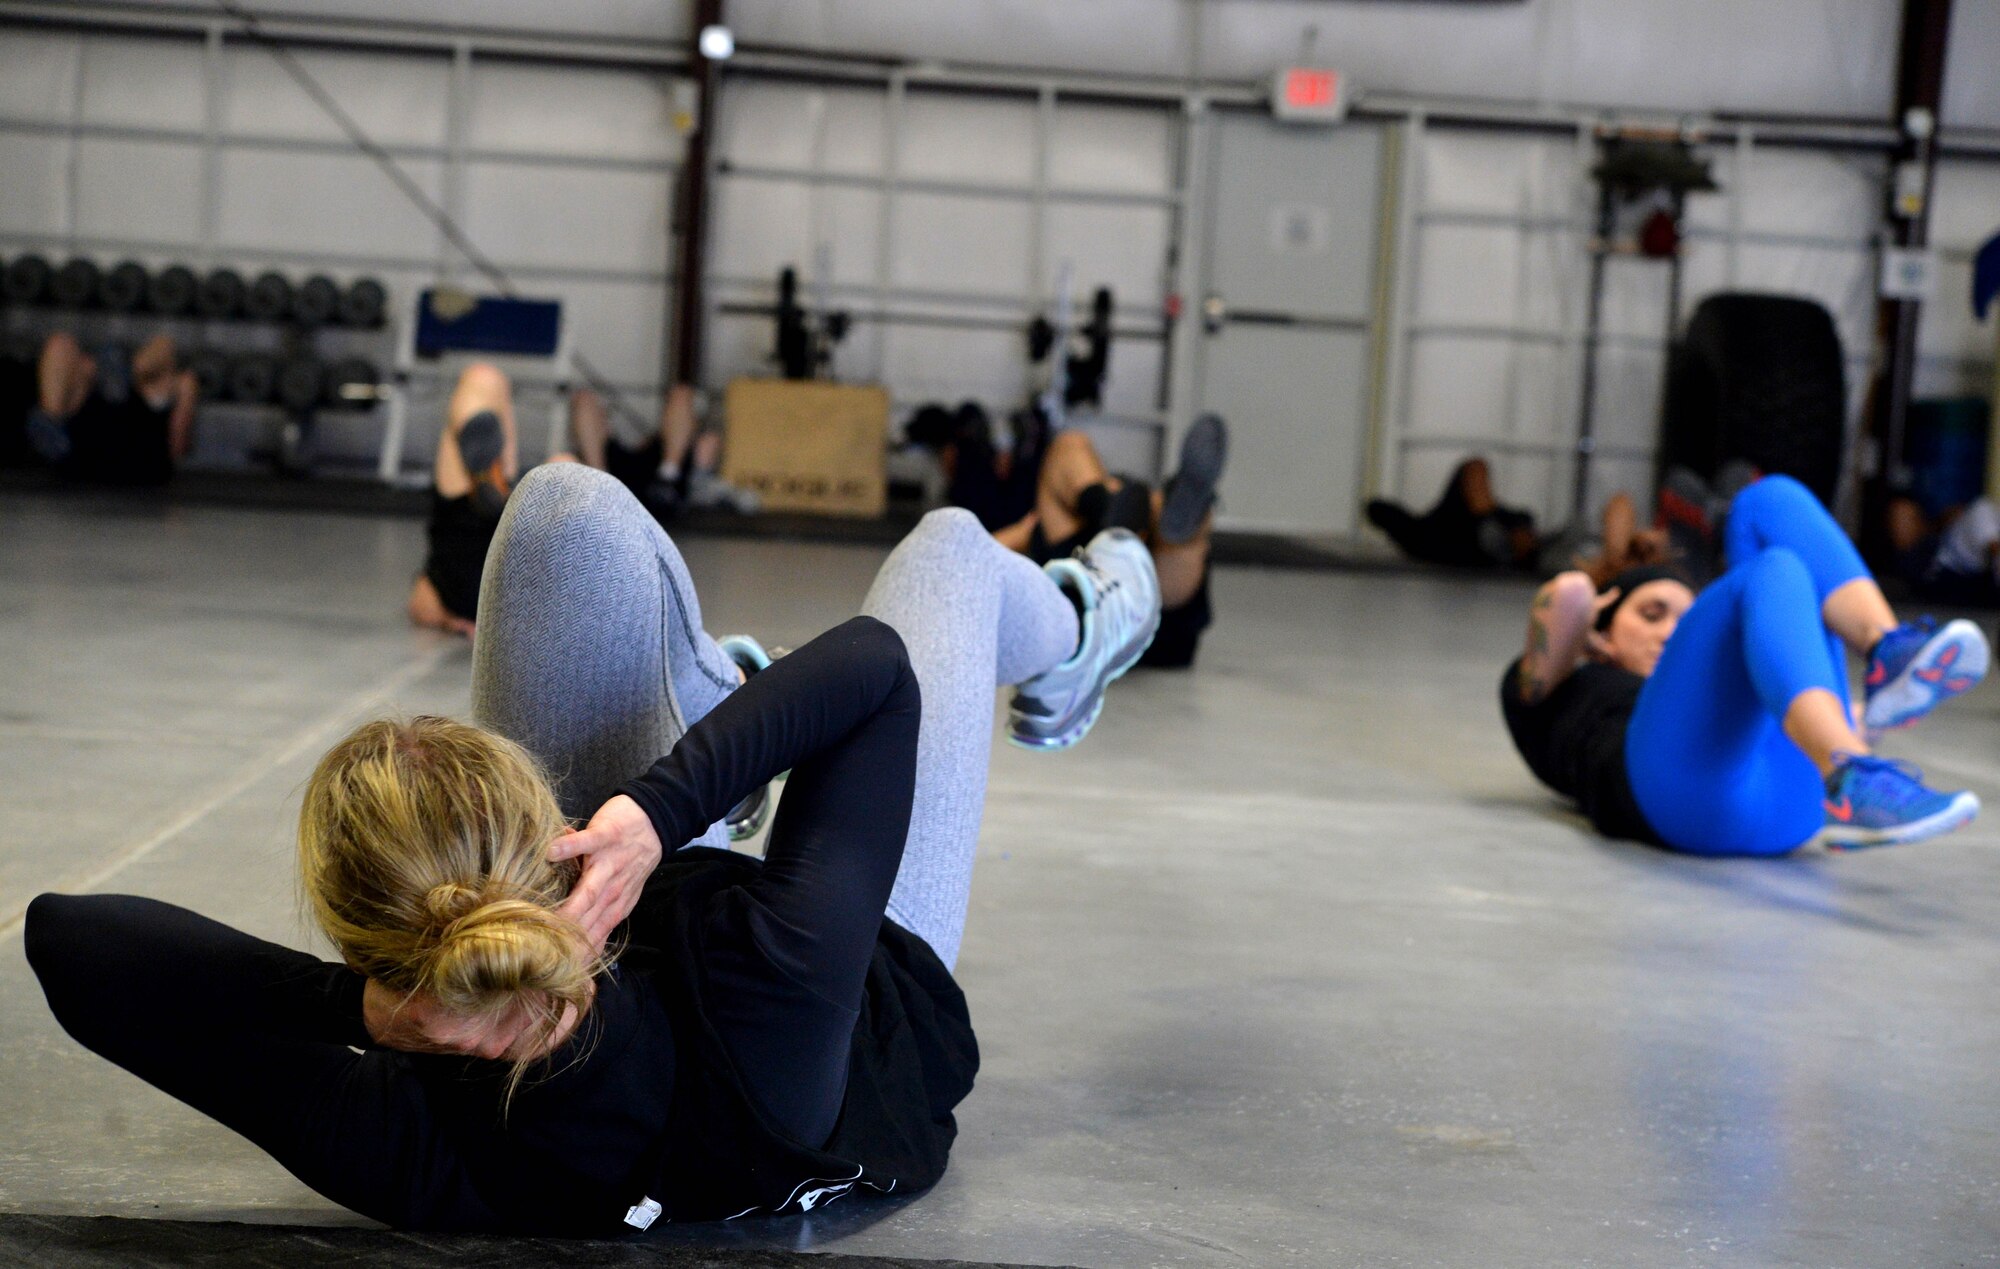 Airmen from the 432nd Wing and 799th Air Base Group participate in Life of a Warrior fitness training Feb. 24, 2017, at Creech Air Force Base, Nev. During the session, Airmen strengthened their bodies through a variety of functional exercises such as squats, push-ups, sit-ups, running and a host of other movements. (U.S. Air Force photo/Airman 1st Class Kristan Campbell)

